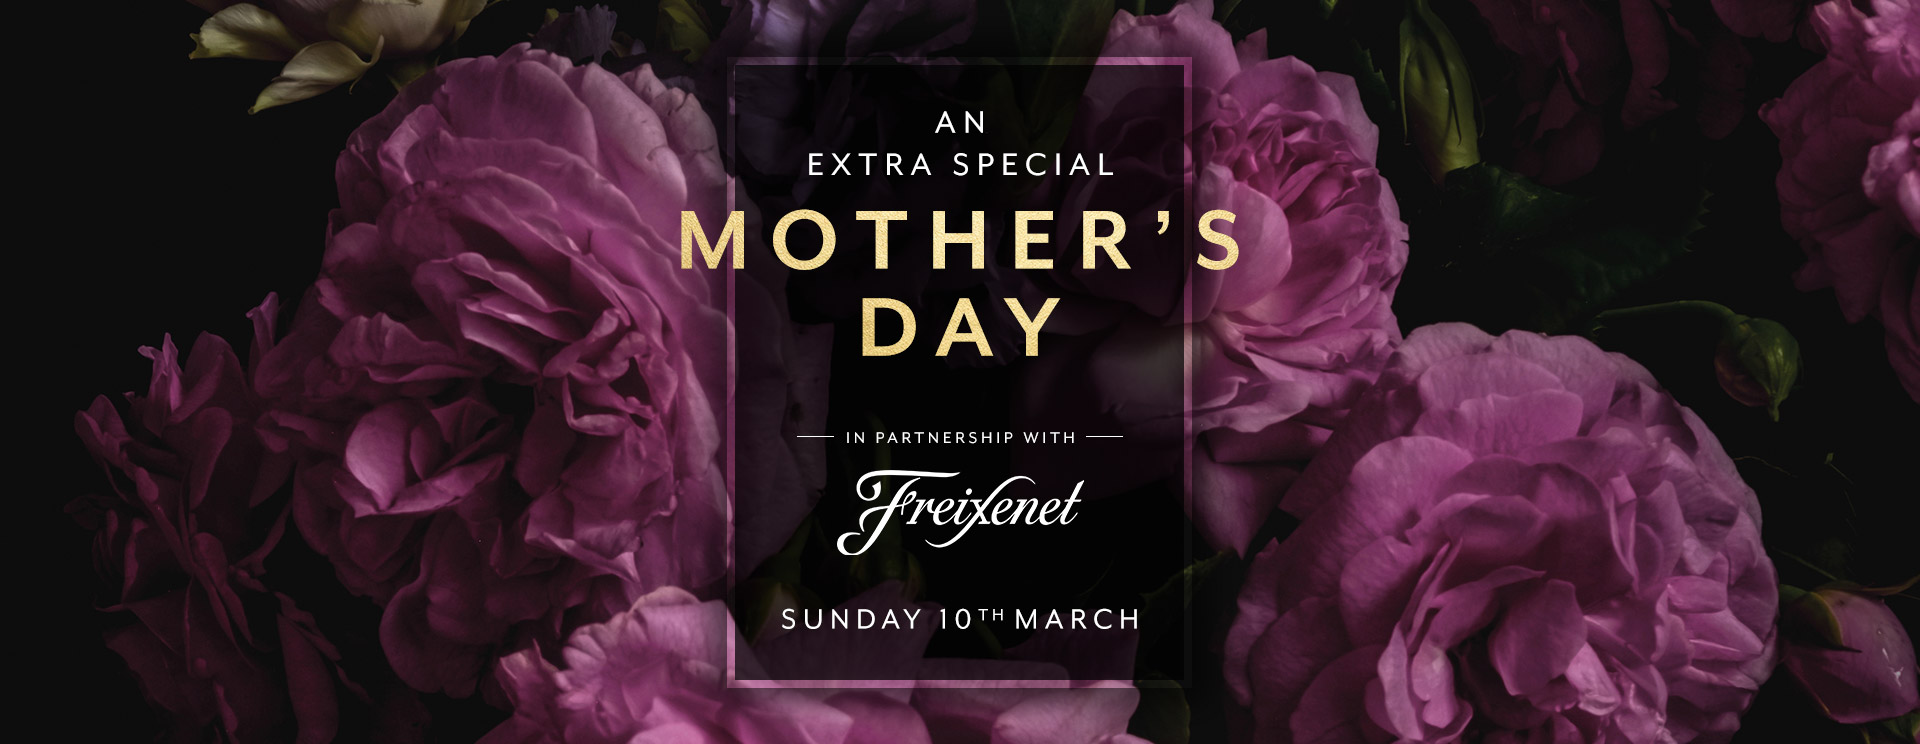 Mother’s Day menu/meal in Ilkley